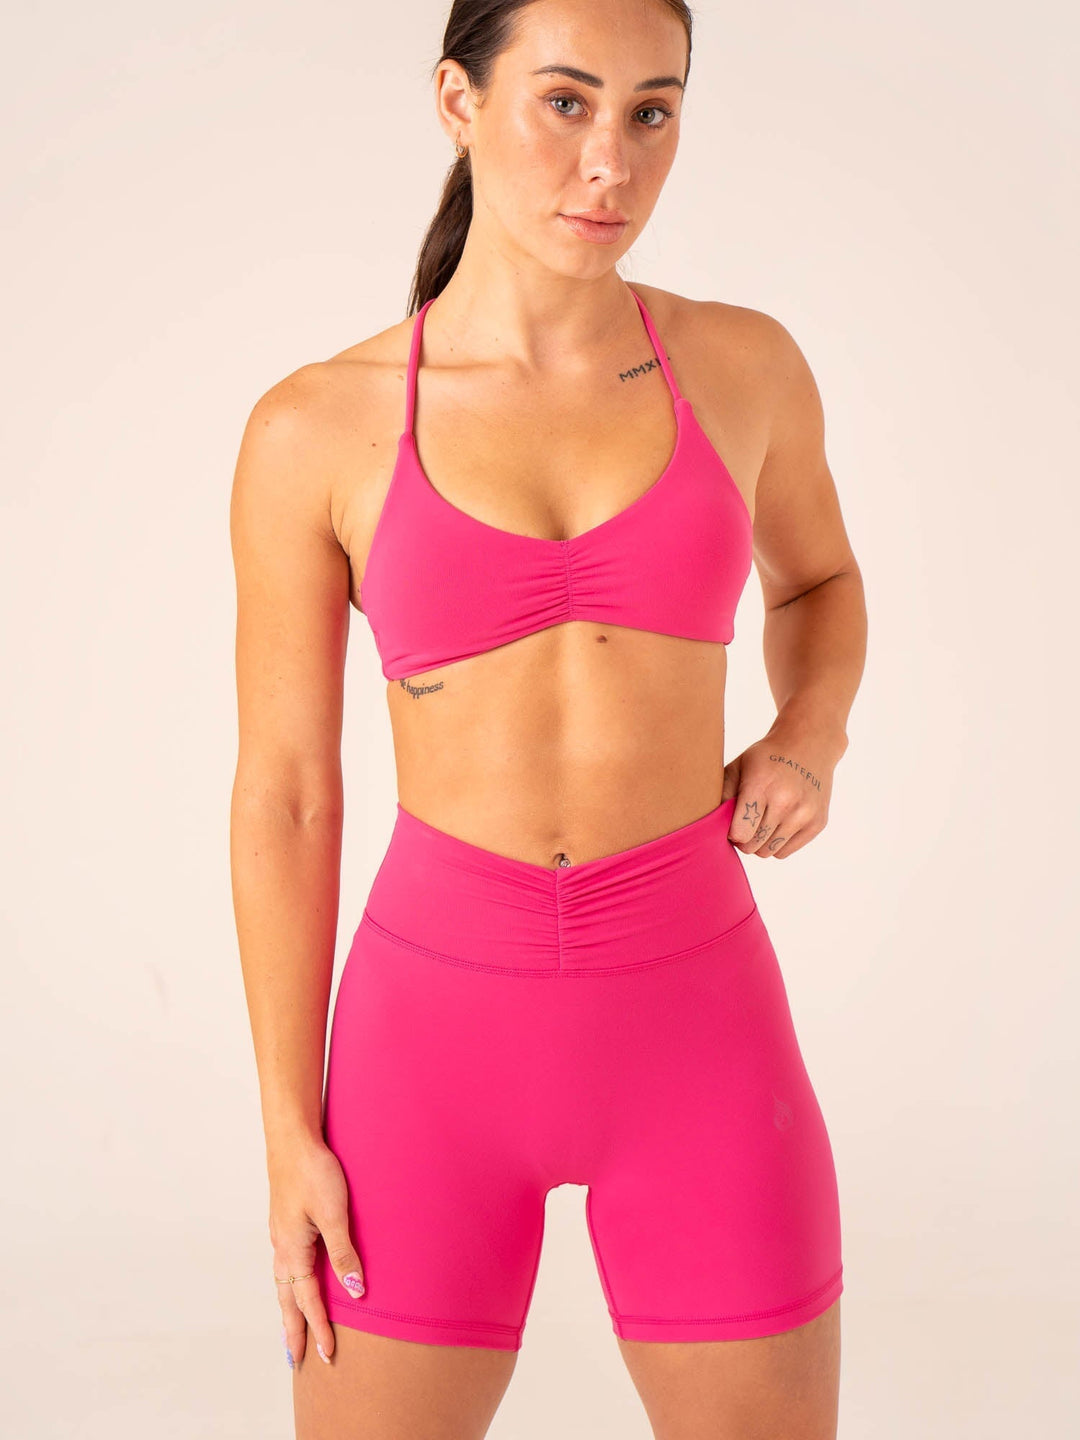 Tempo Shorts - Hot Pink Clothing Ryderwear 